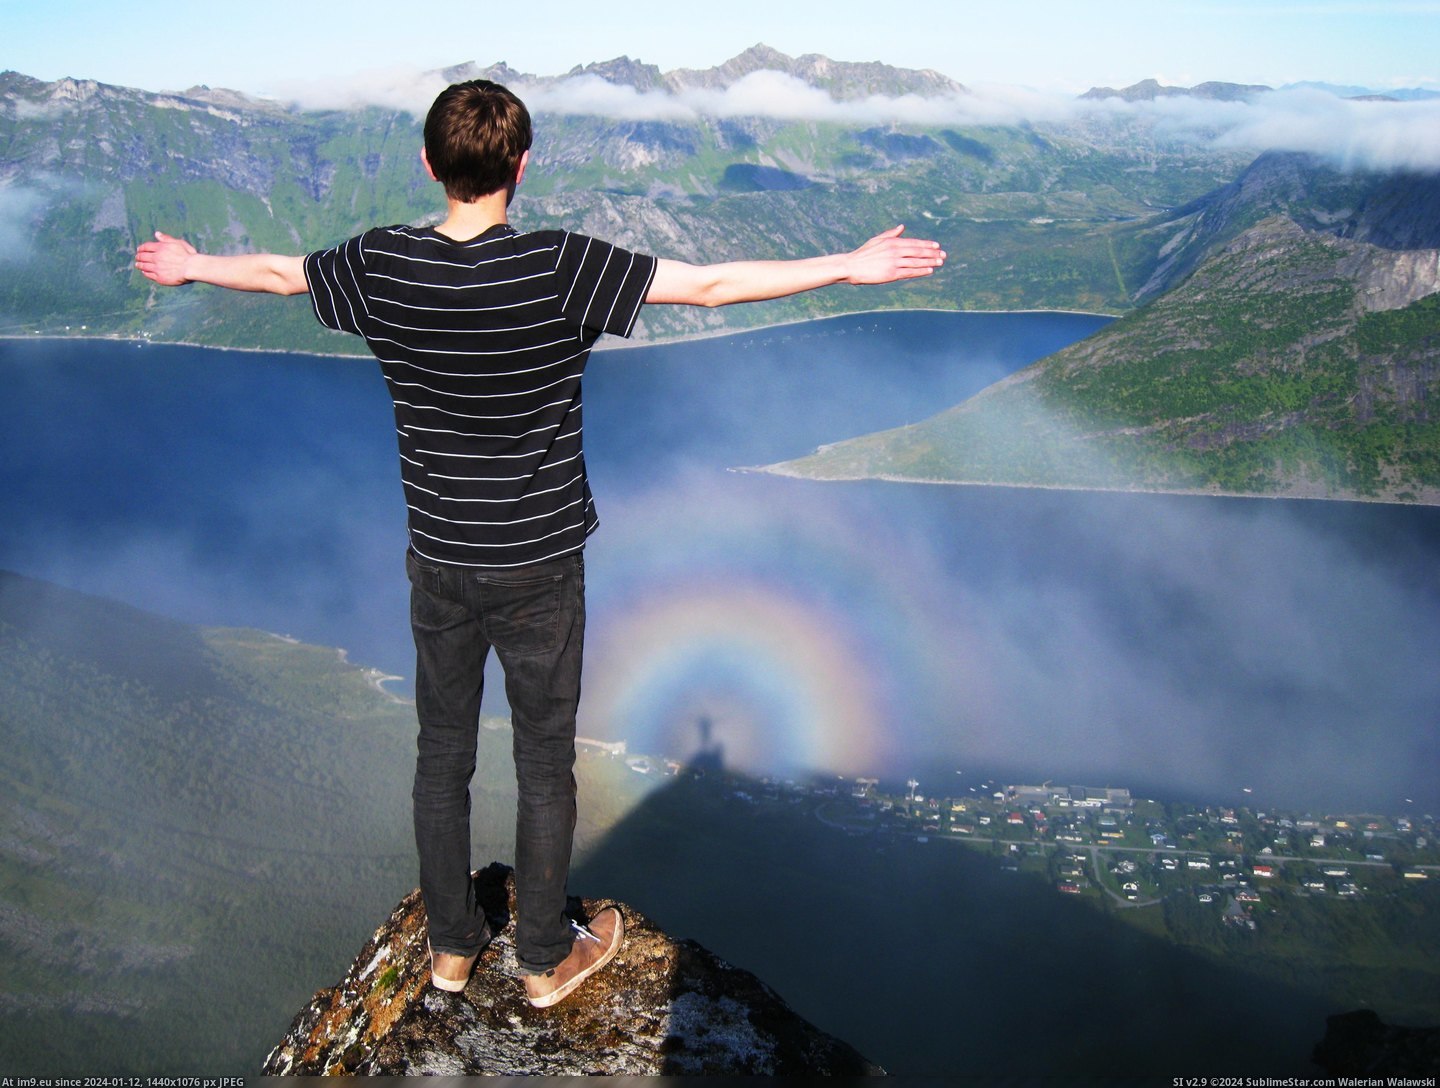 #Year #Beautiful #Top #Mountain #Unique #Degree #Segla #Shado #Moment #Norway #Northern #Rainbow [Pics] Unique moment from last year. Me on top of the mountain Segla, Northern Norway. 360 degree rainbow with a beautiful shado Pic. (Bild von album My r/PICS favs))